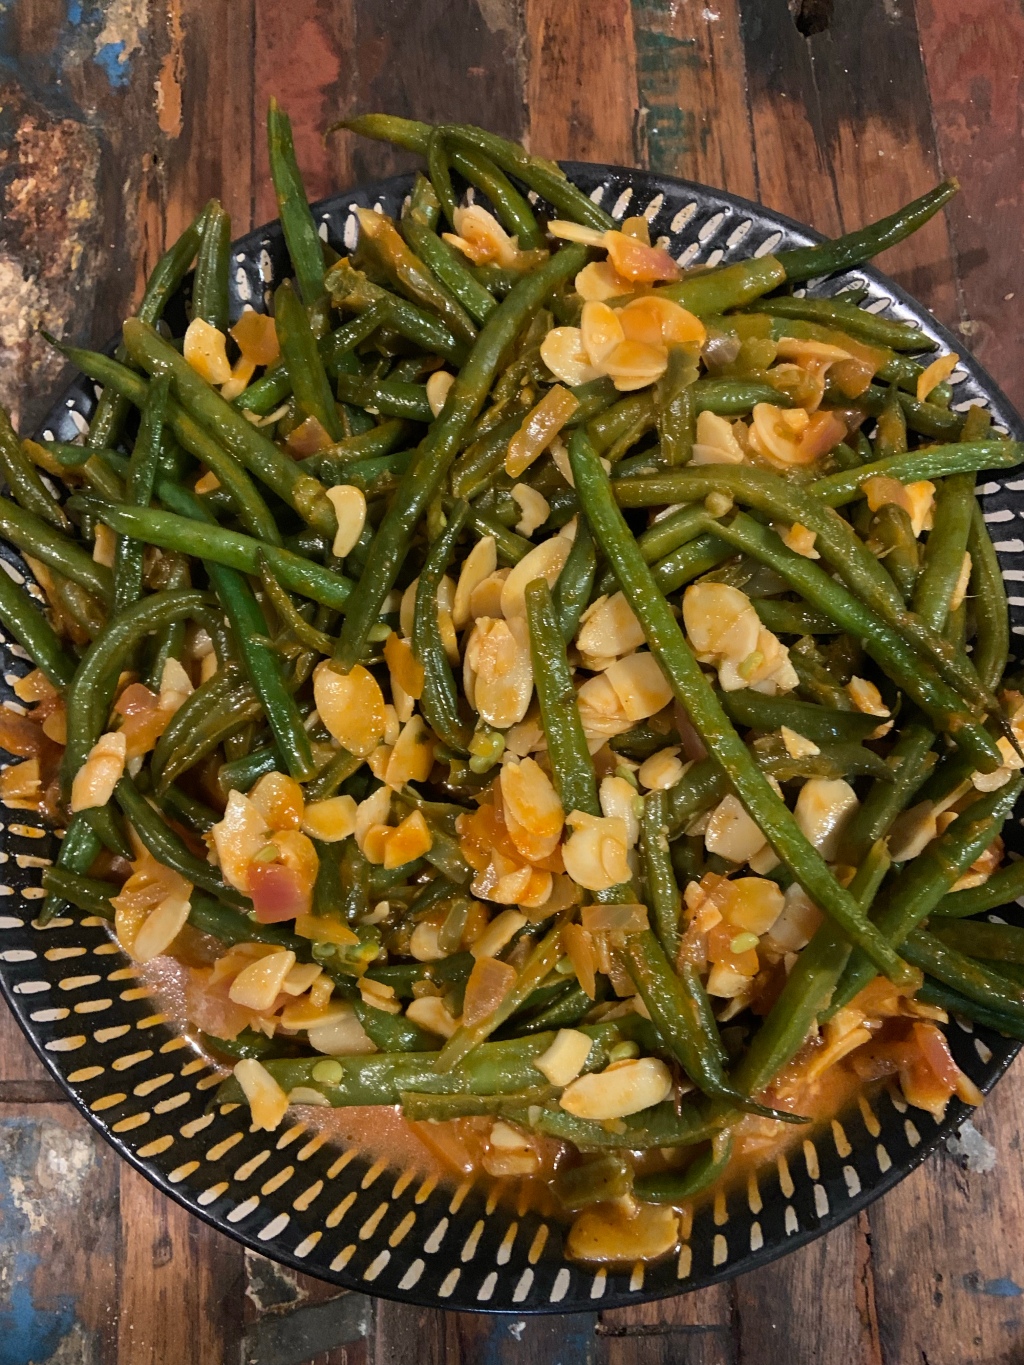 Overcooked Green Beans with slivered almonds